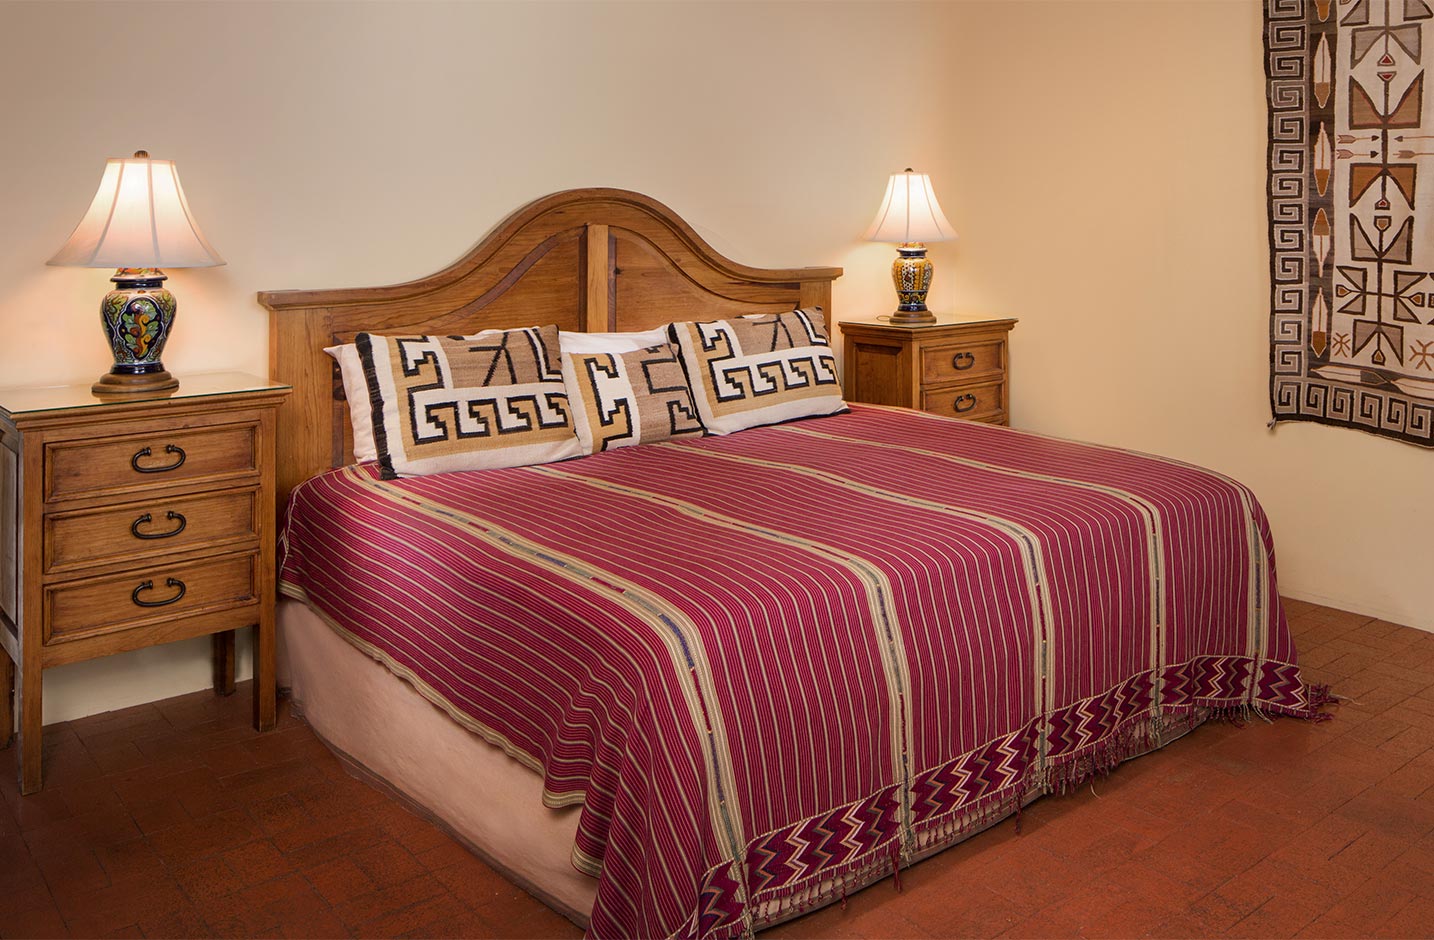 A king size bed with wooden headboard in a large room